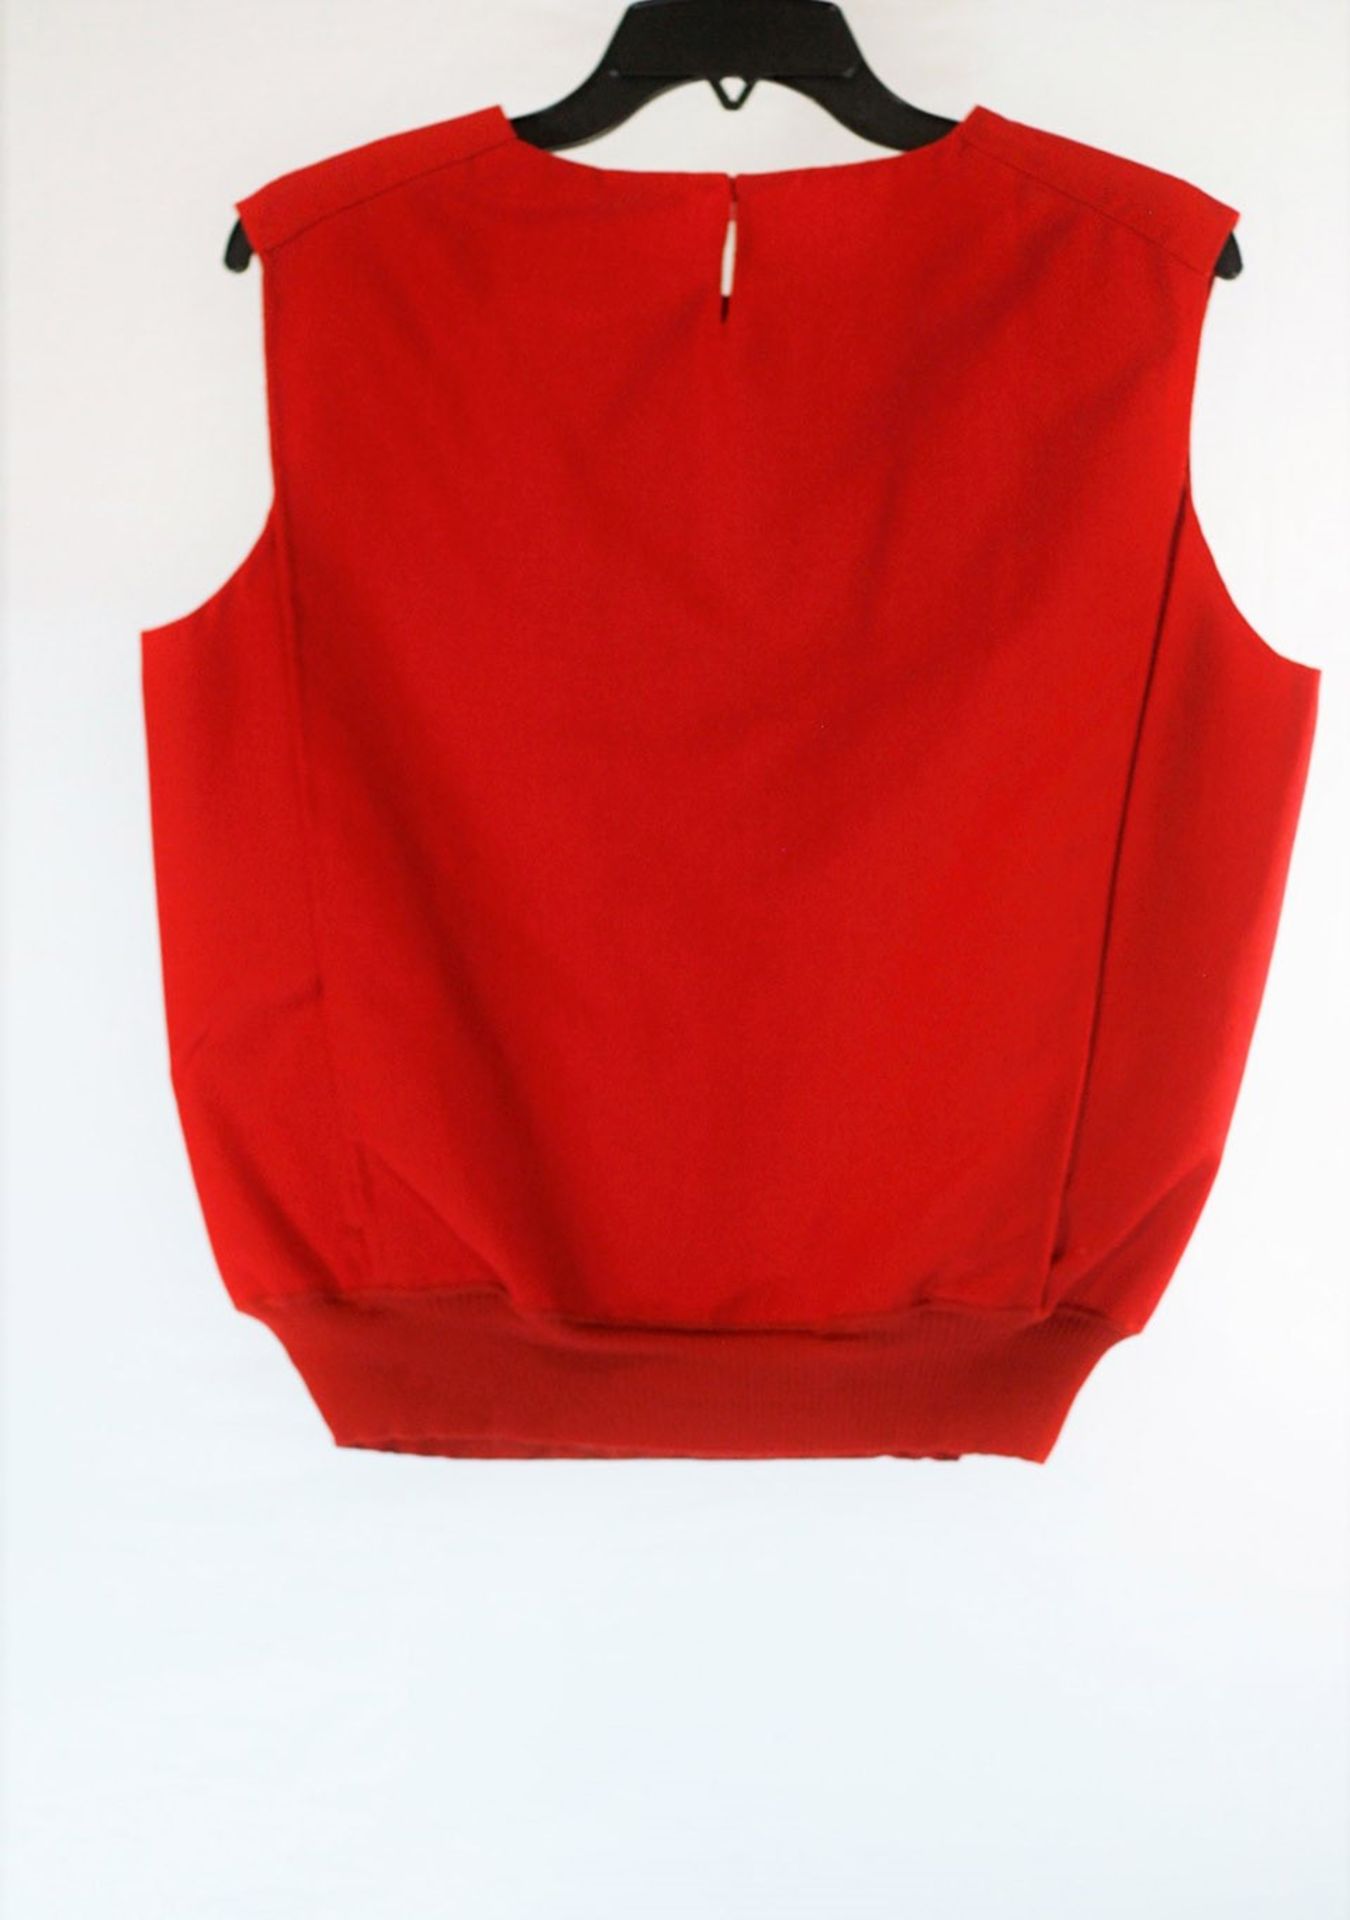 1 x Agnona Red Vest - Size: 18 - Material: 50% Cotton, 28% Mohair, 18% Silk, 4% Wool. Details 55% - Image 7 of 8